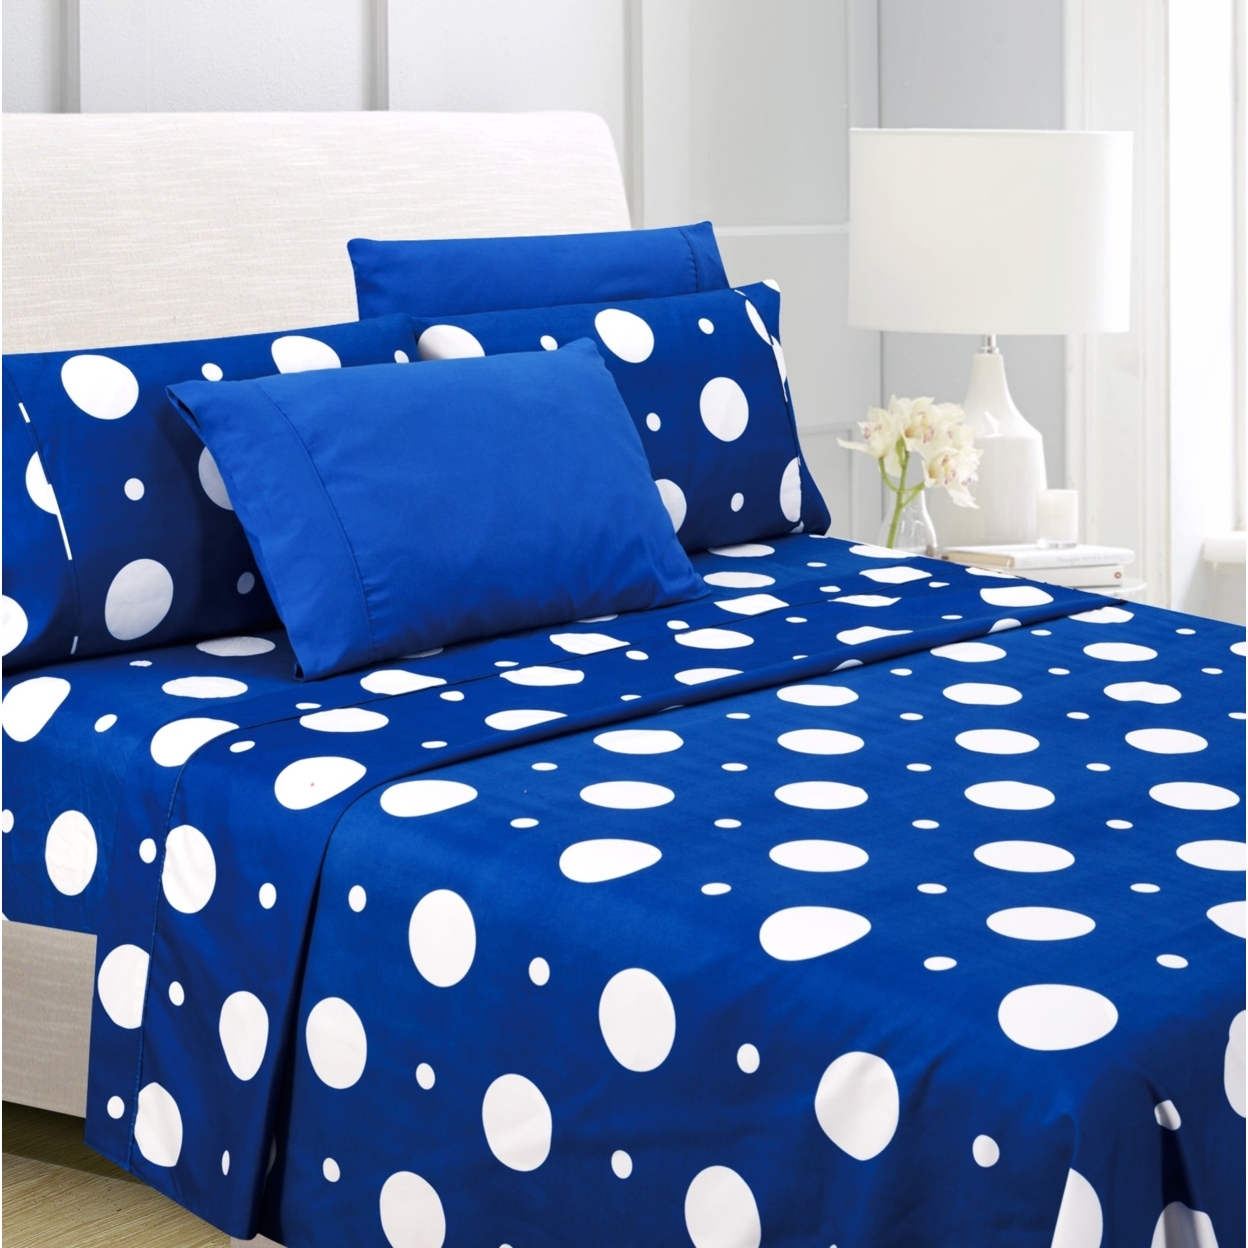 American Home Collection Ultra Soft 4-6 Piece Polka Dot Printed Bed Sheet Set - Full, Blue